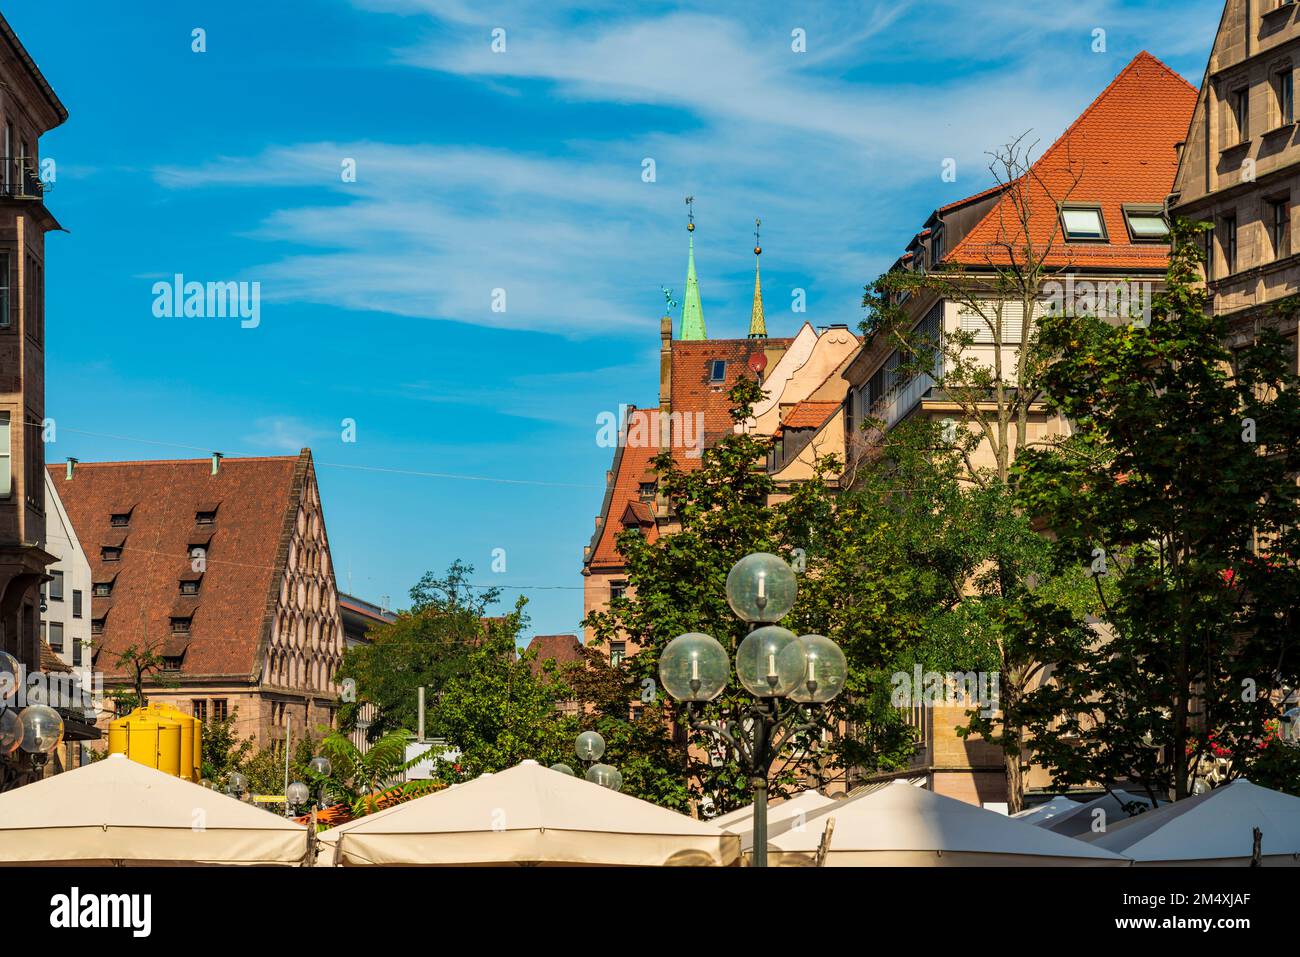 Germany, Bavaria, Nuremberg, Buildings along Konigstrasse with street light and canopies in foreground Stock Photo